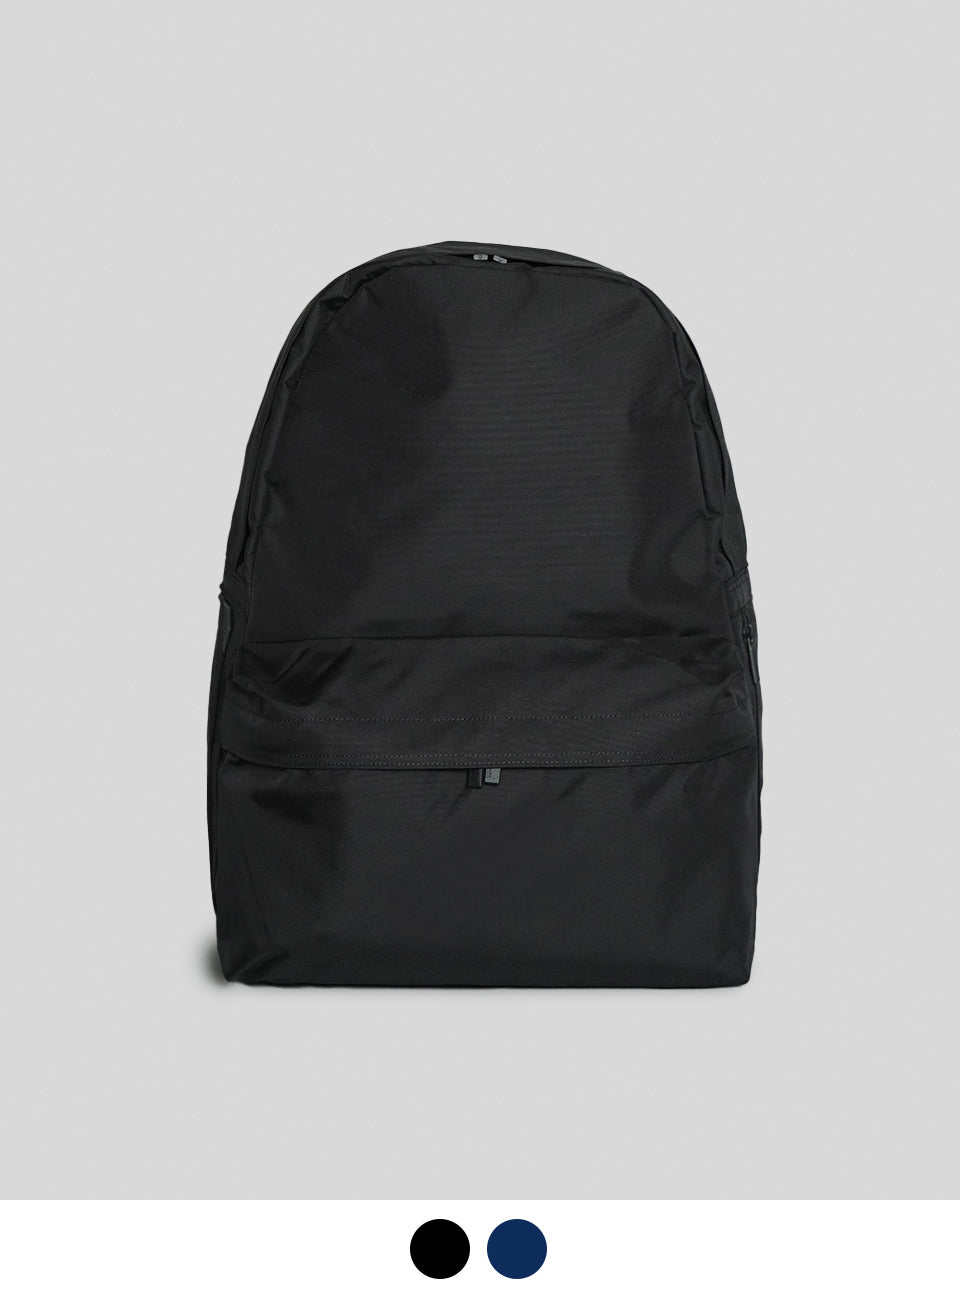 MONOLITH モノリス BACKPACK STANDARD L バックパック スタンダード SD-1019【送料無料】